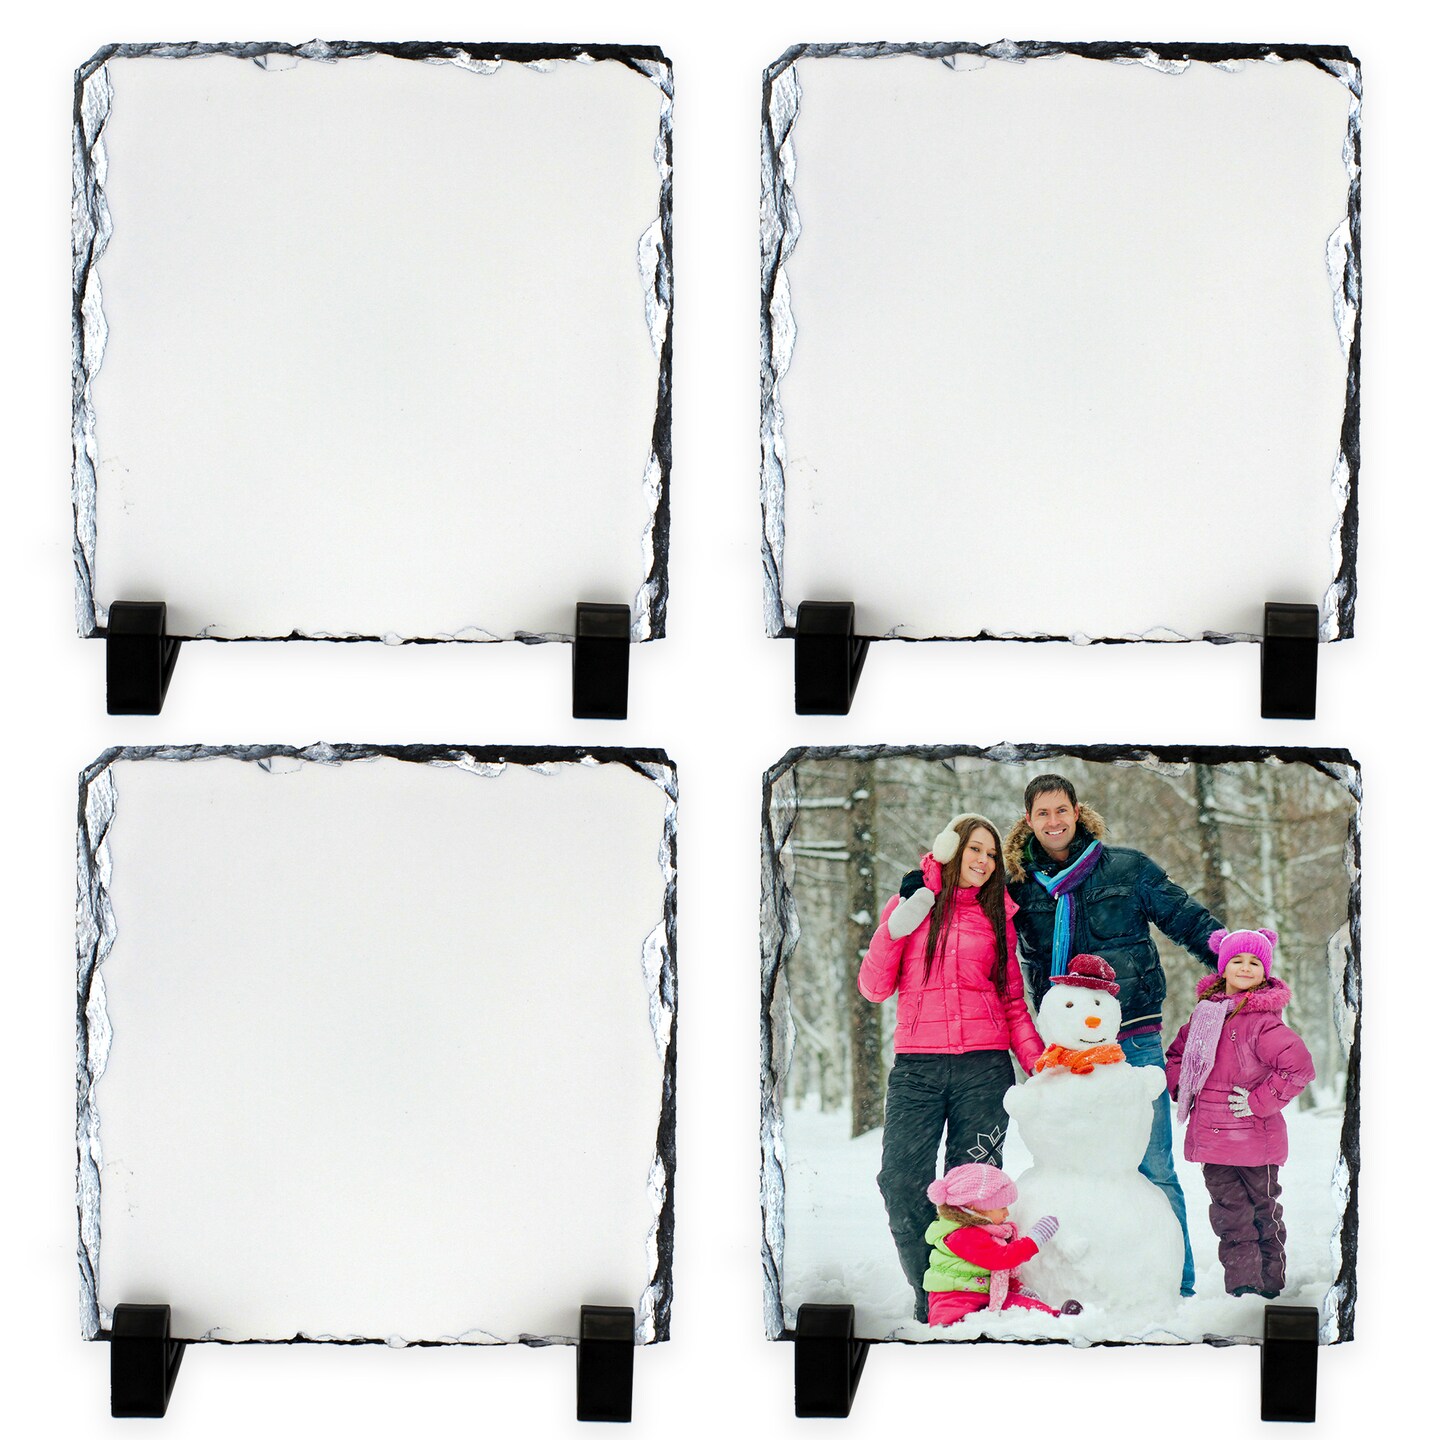 SubliSLATE Sublimation Slate Blank, Round. Includes Black Display Feet for  Photo Quality Sublimation Printing